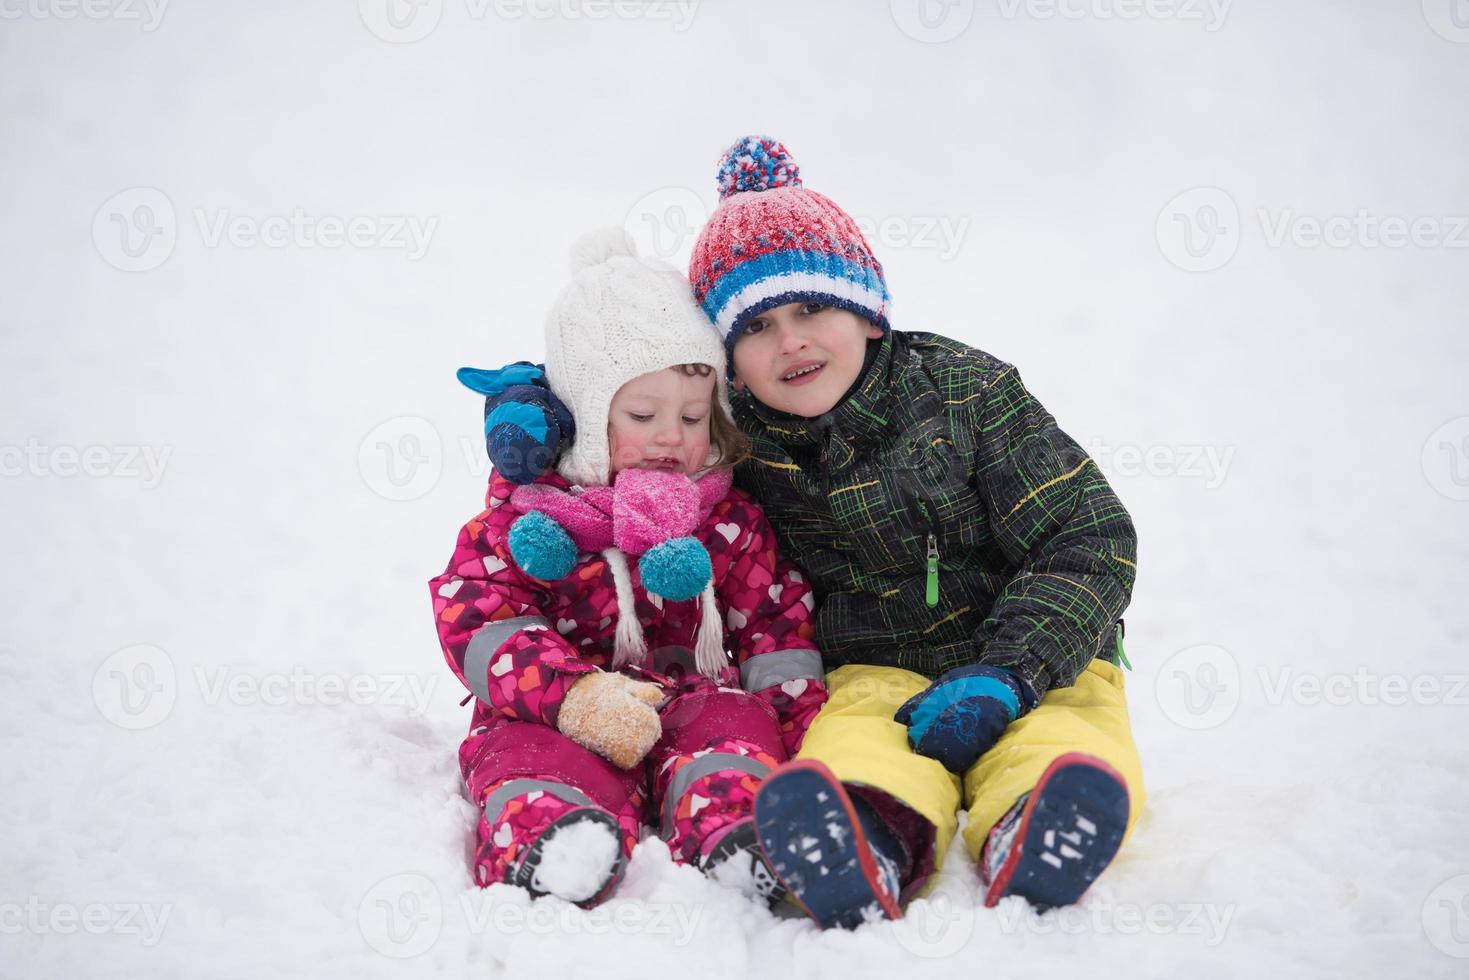 children group  having fun and play together in fresh snow photo